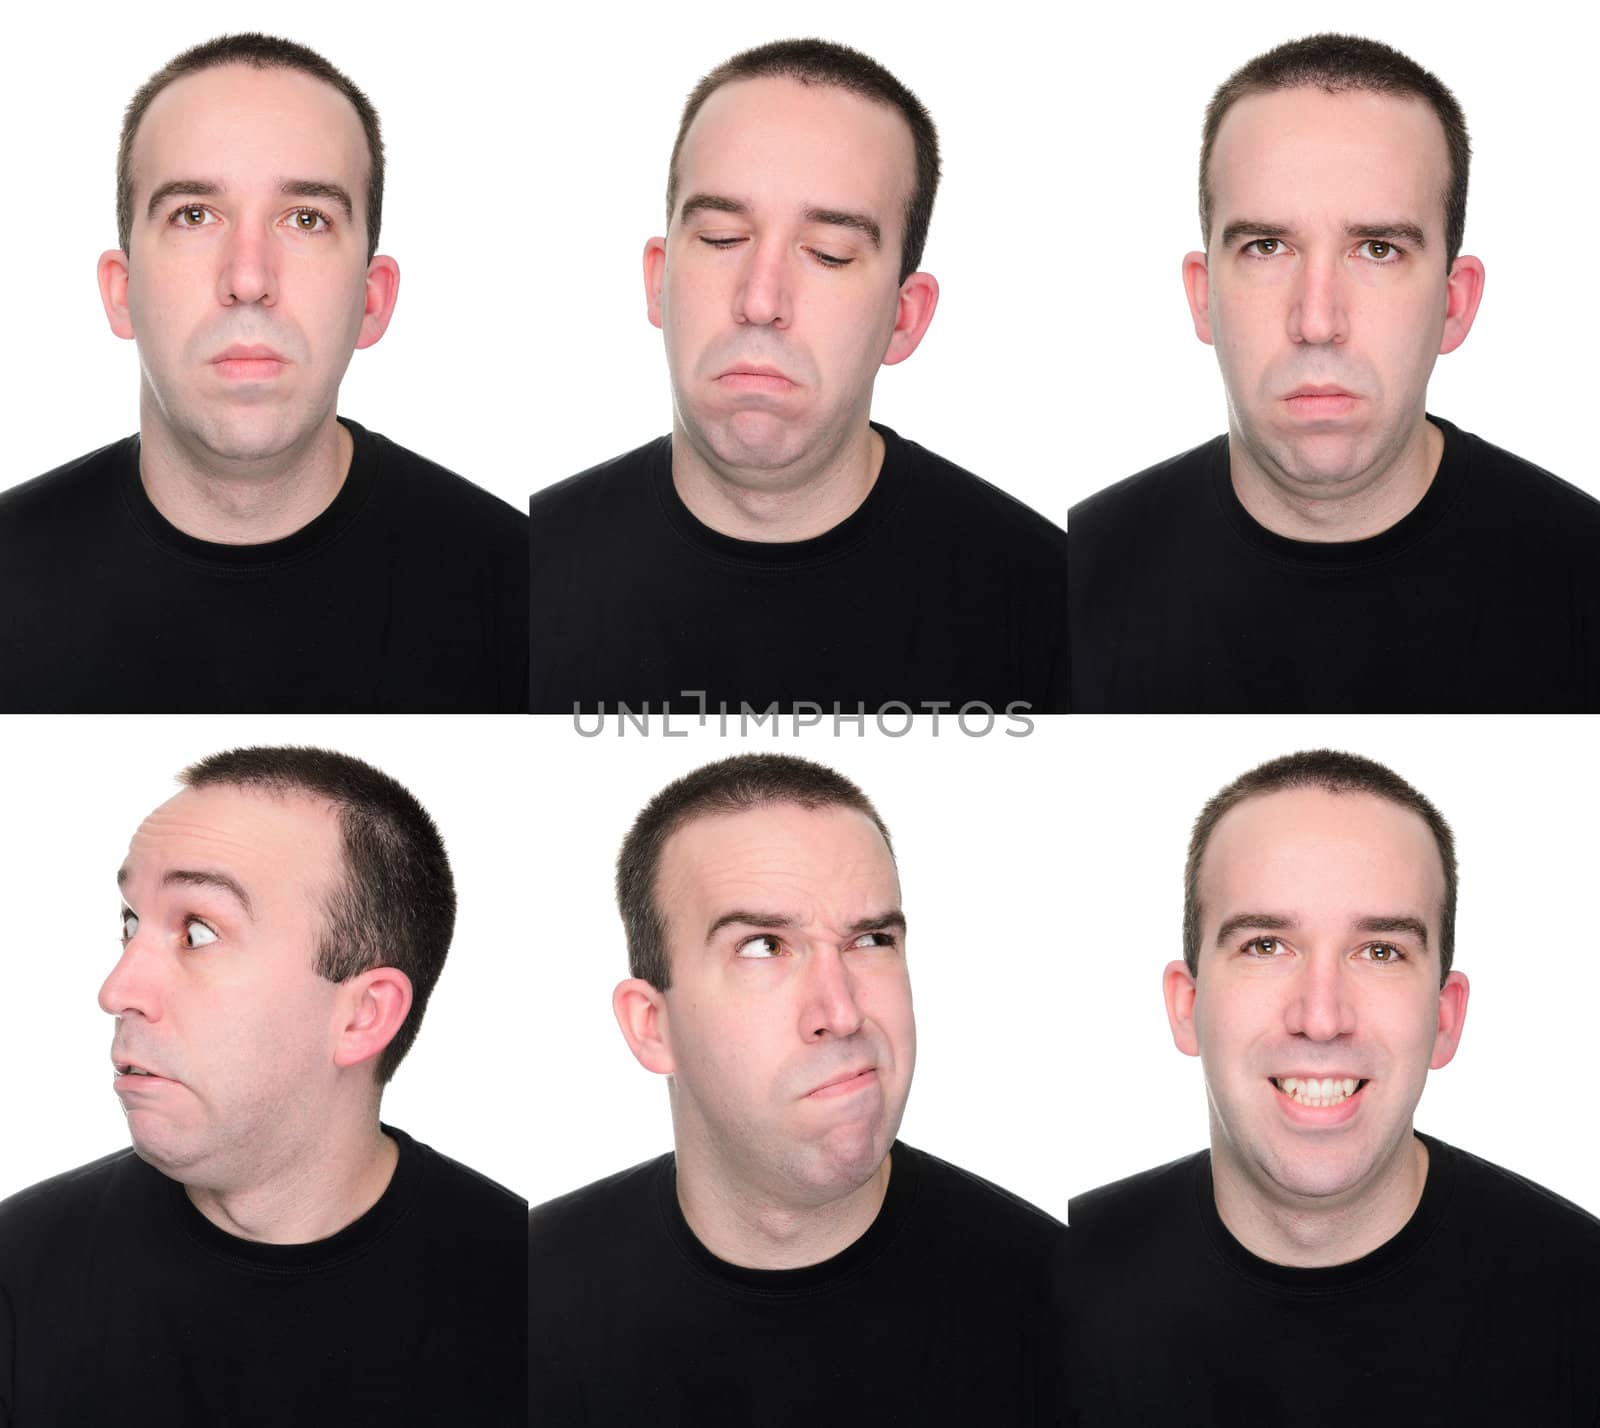 A man showing off multiple emotions or expressions.